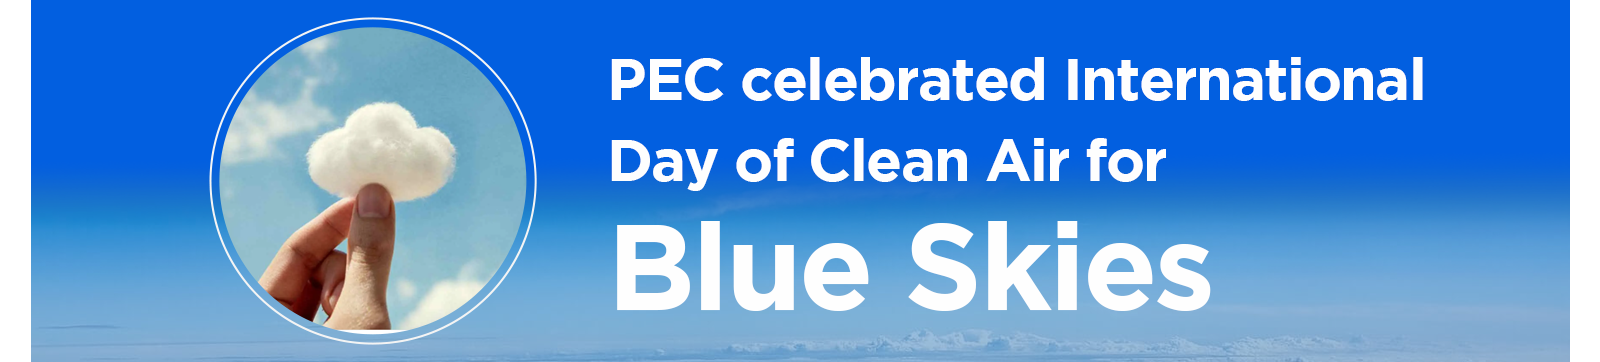 PEC Celebrated International Day of Clean Air for Blue Skies